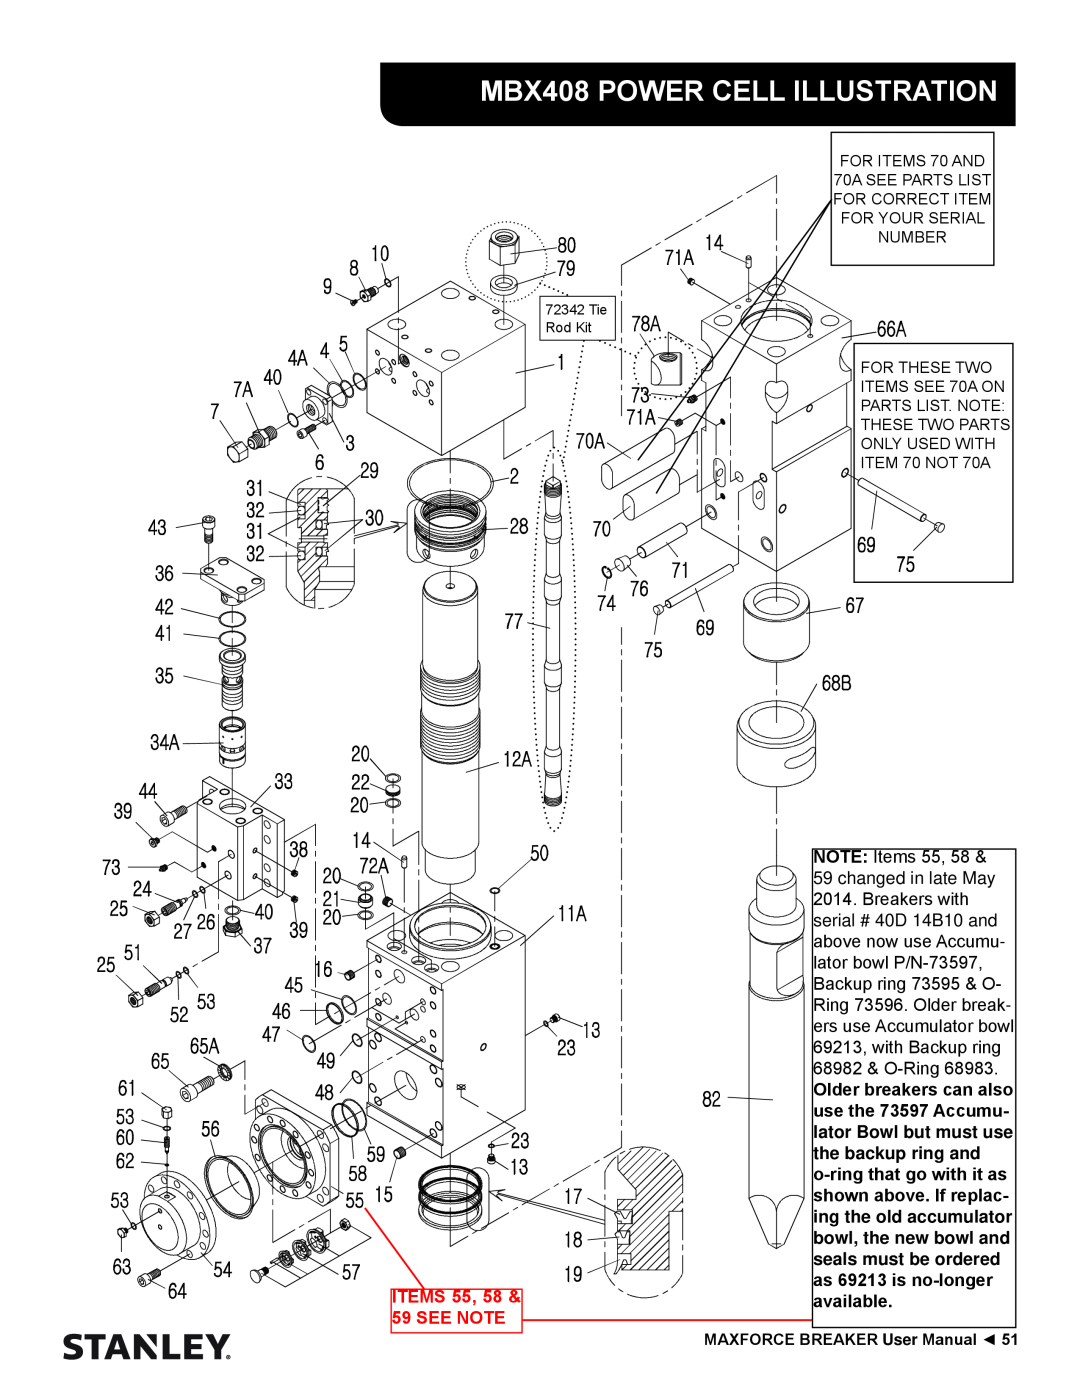 Stanley Black & Decker MBX138 thru MBX608 user manual MBX408 POWER CELL ILLUSTRATION, ITEMS 55, 58 & 59 SEE NOTE 